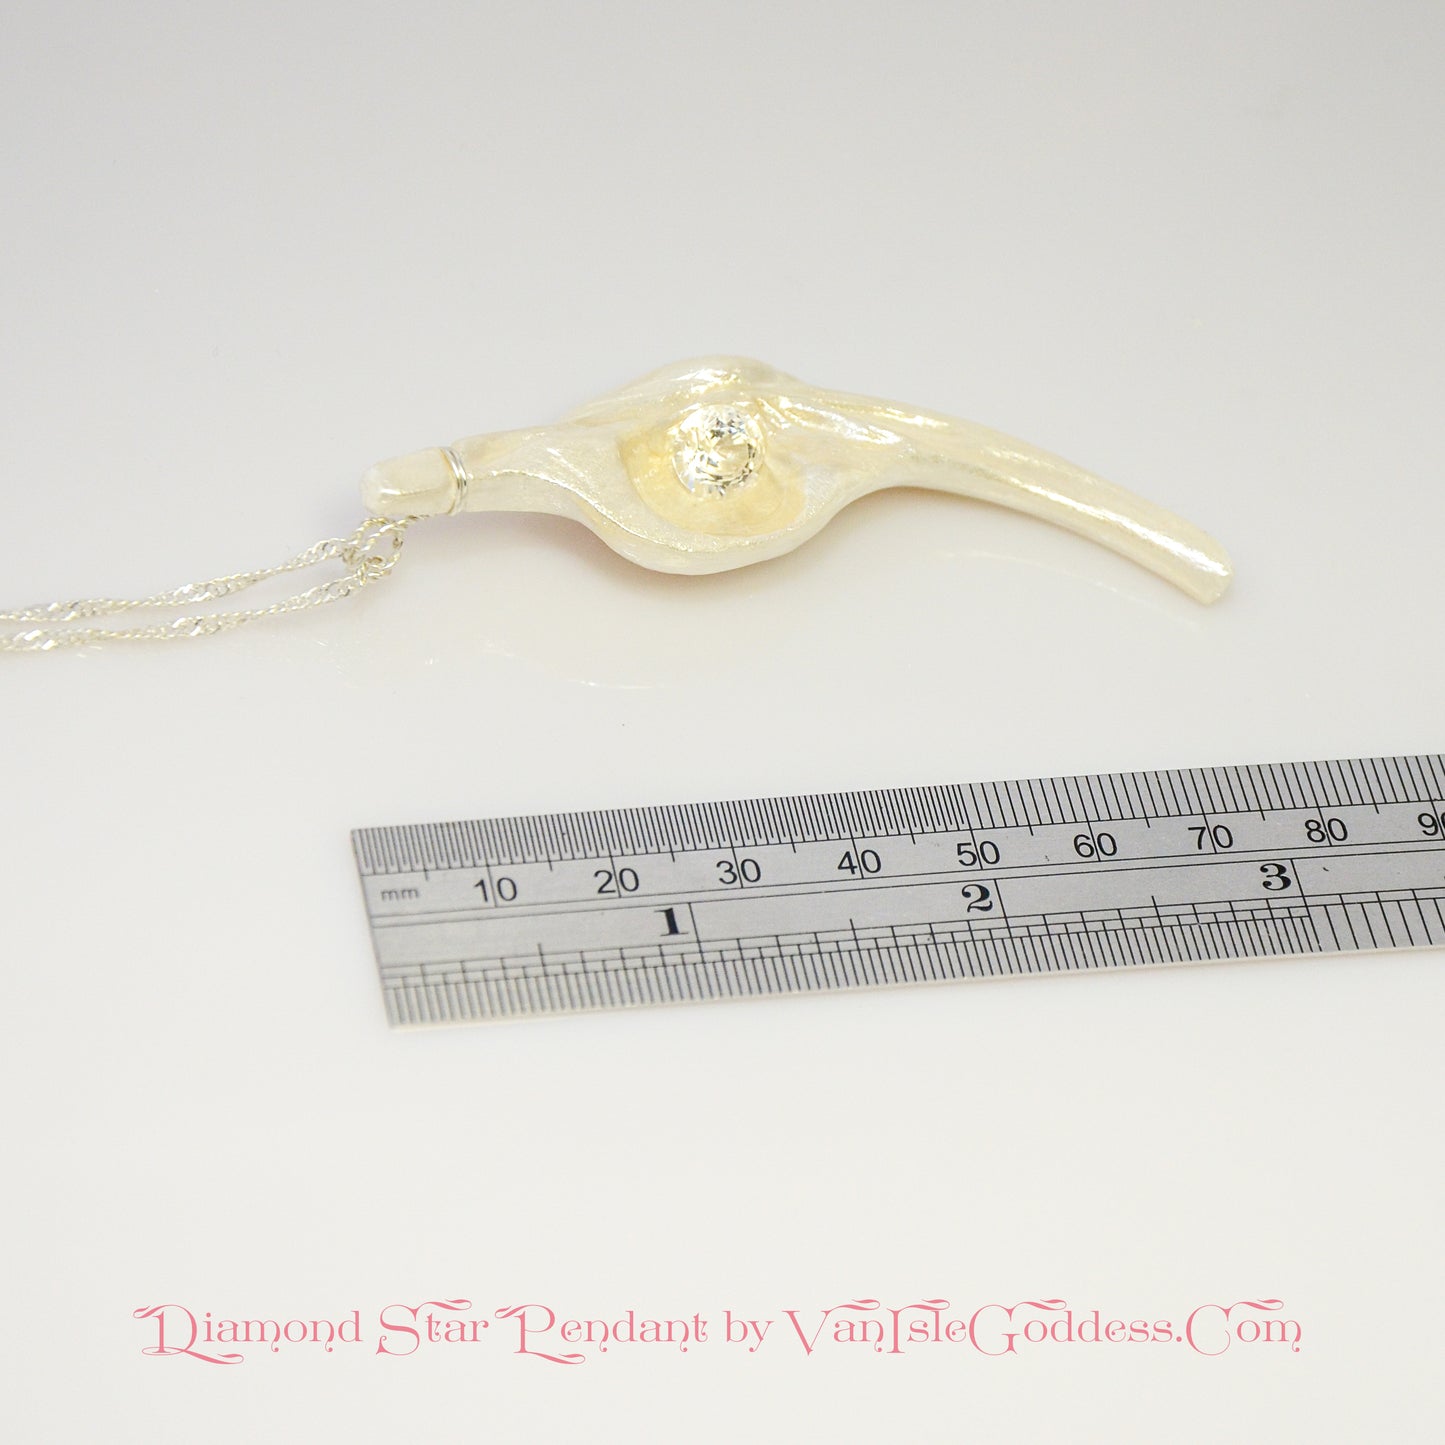 Diamond Star natural seashell pendant with eight mm faceted herkimer diamond.  The pendant is shown laying along a ruler so the viewer can see the length of the pendant.